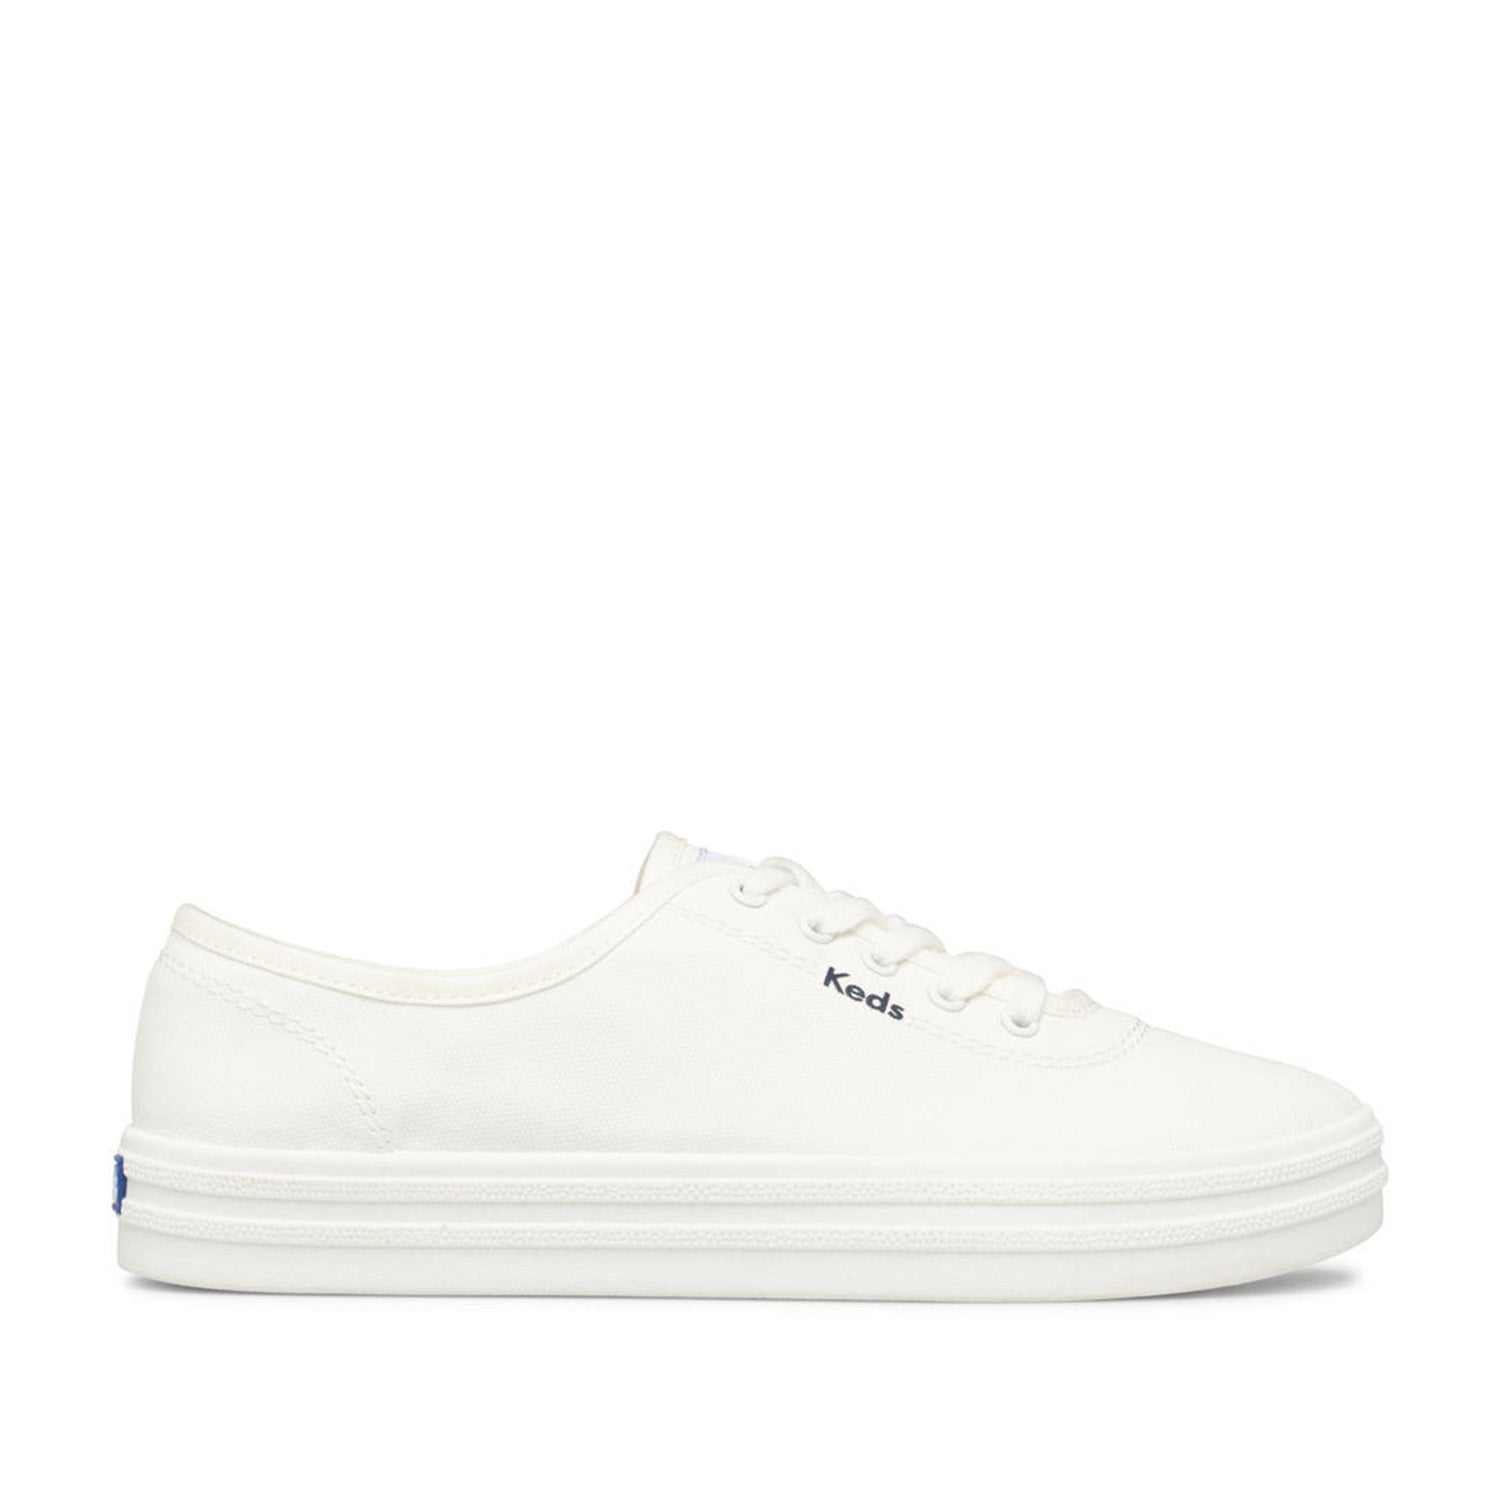 Keds Women's Breezie Canvas in White